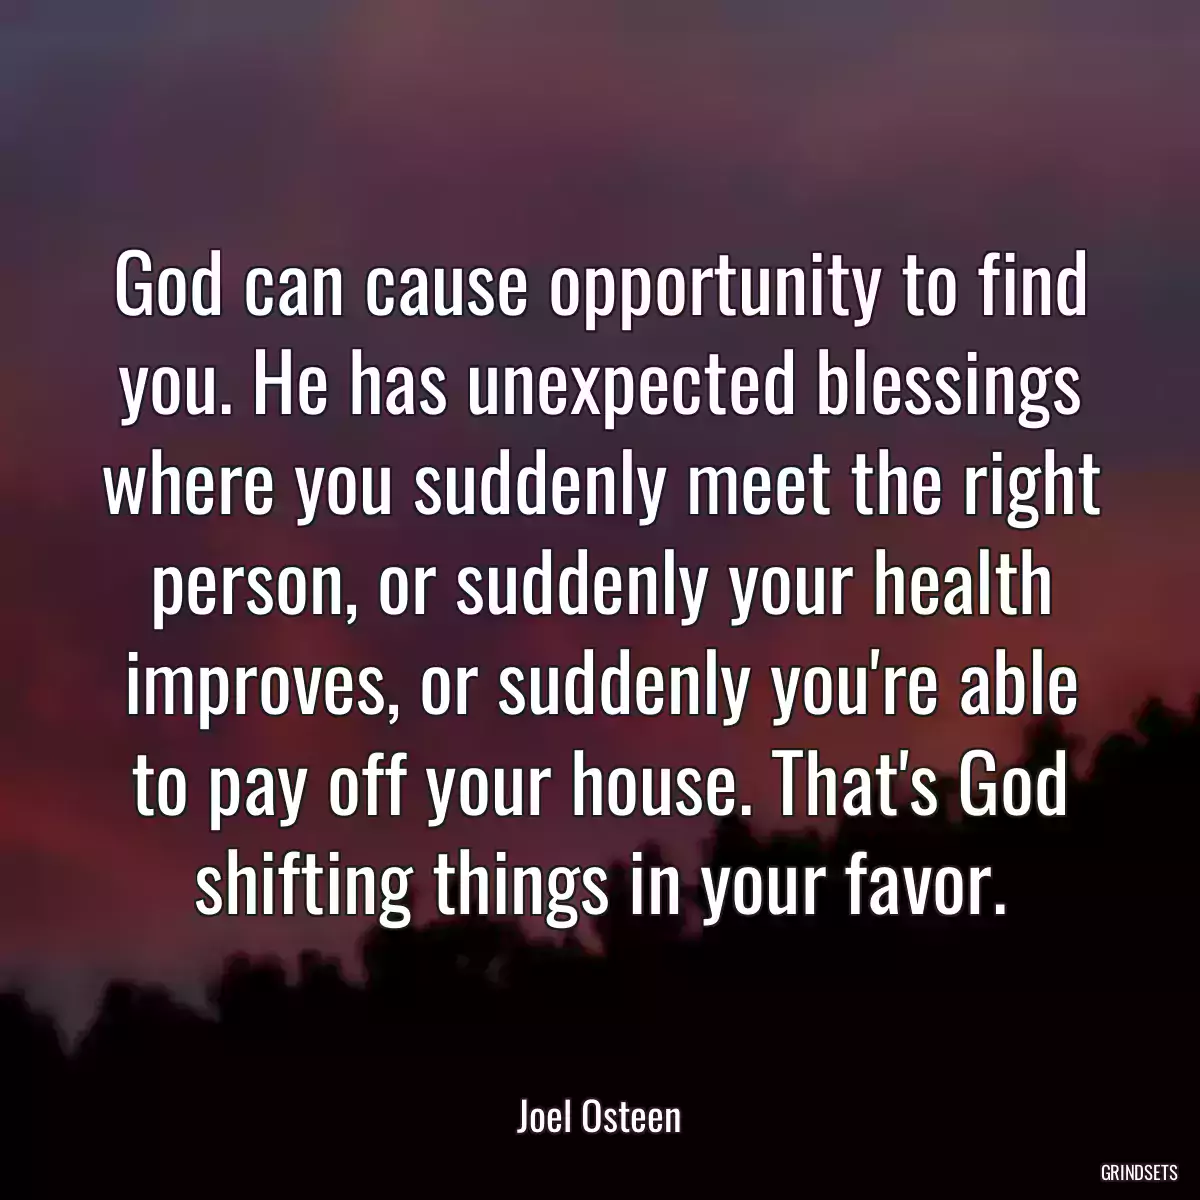 God can cause opportunity to find you. He has unexpected blessings where you suddenly meet the right person, or suddenly your health improves, or suddenly you\'re able to pay off your house. That\'s God shifting things in your favor.